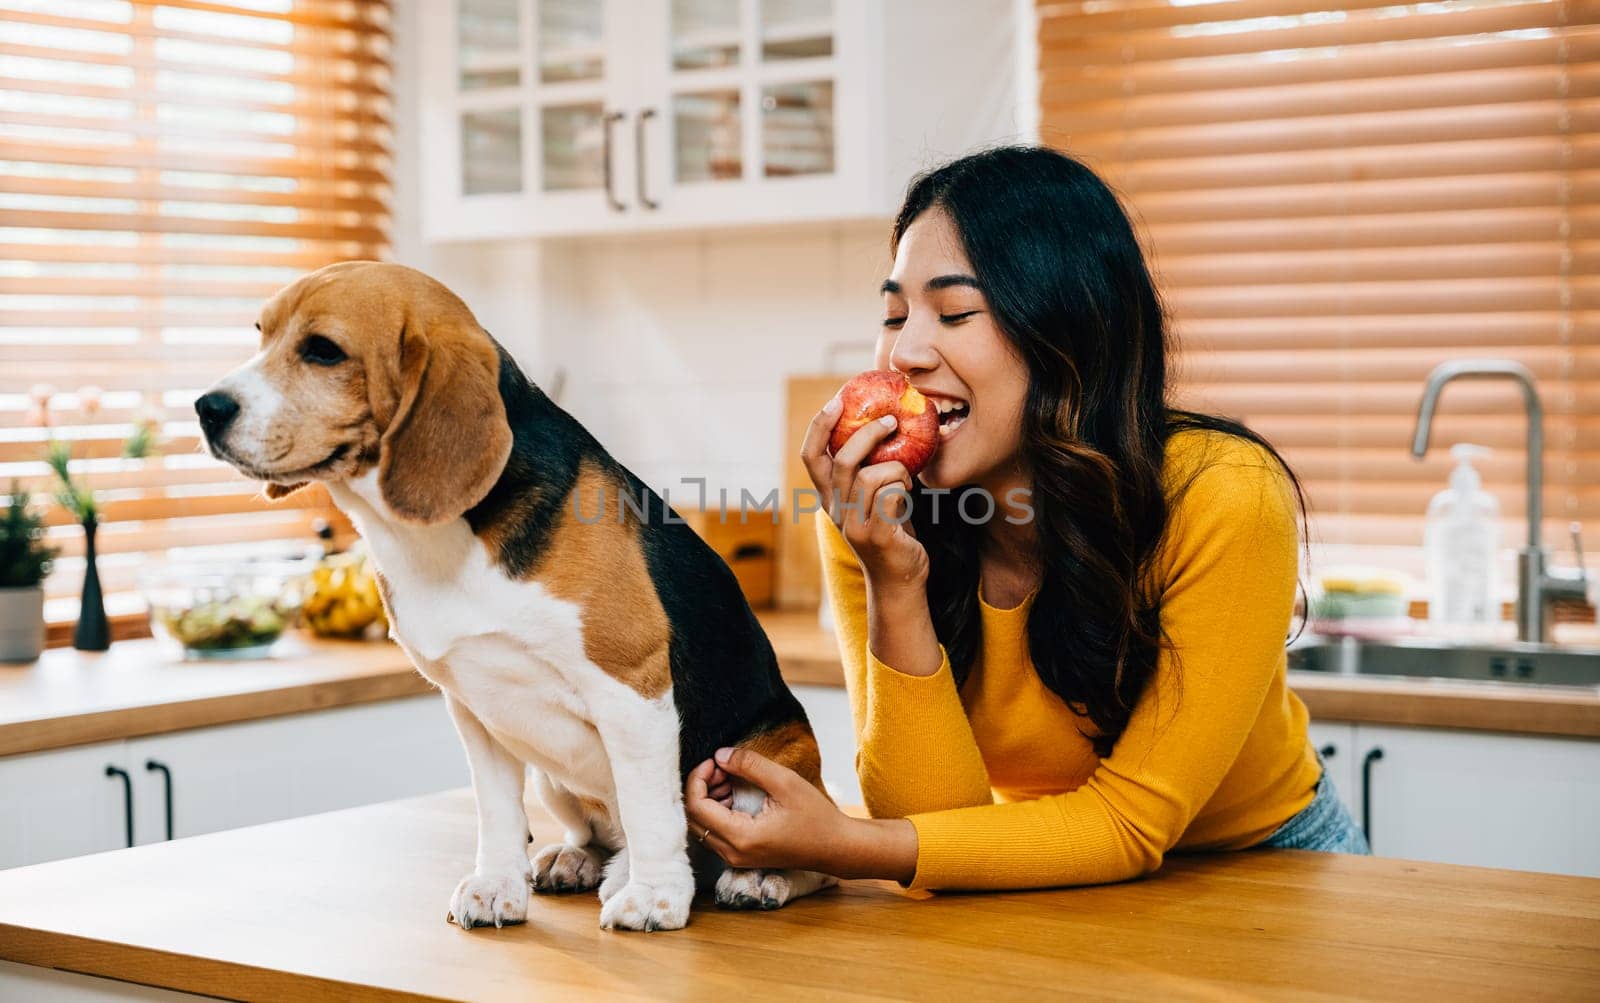 A red apple on the kitchen table becomes a symbol of togetherness as a woman and her retriever, her loyal companion, share it. Their joy and dedication as owner and pet shine. Pet love by Sorapop